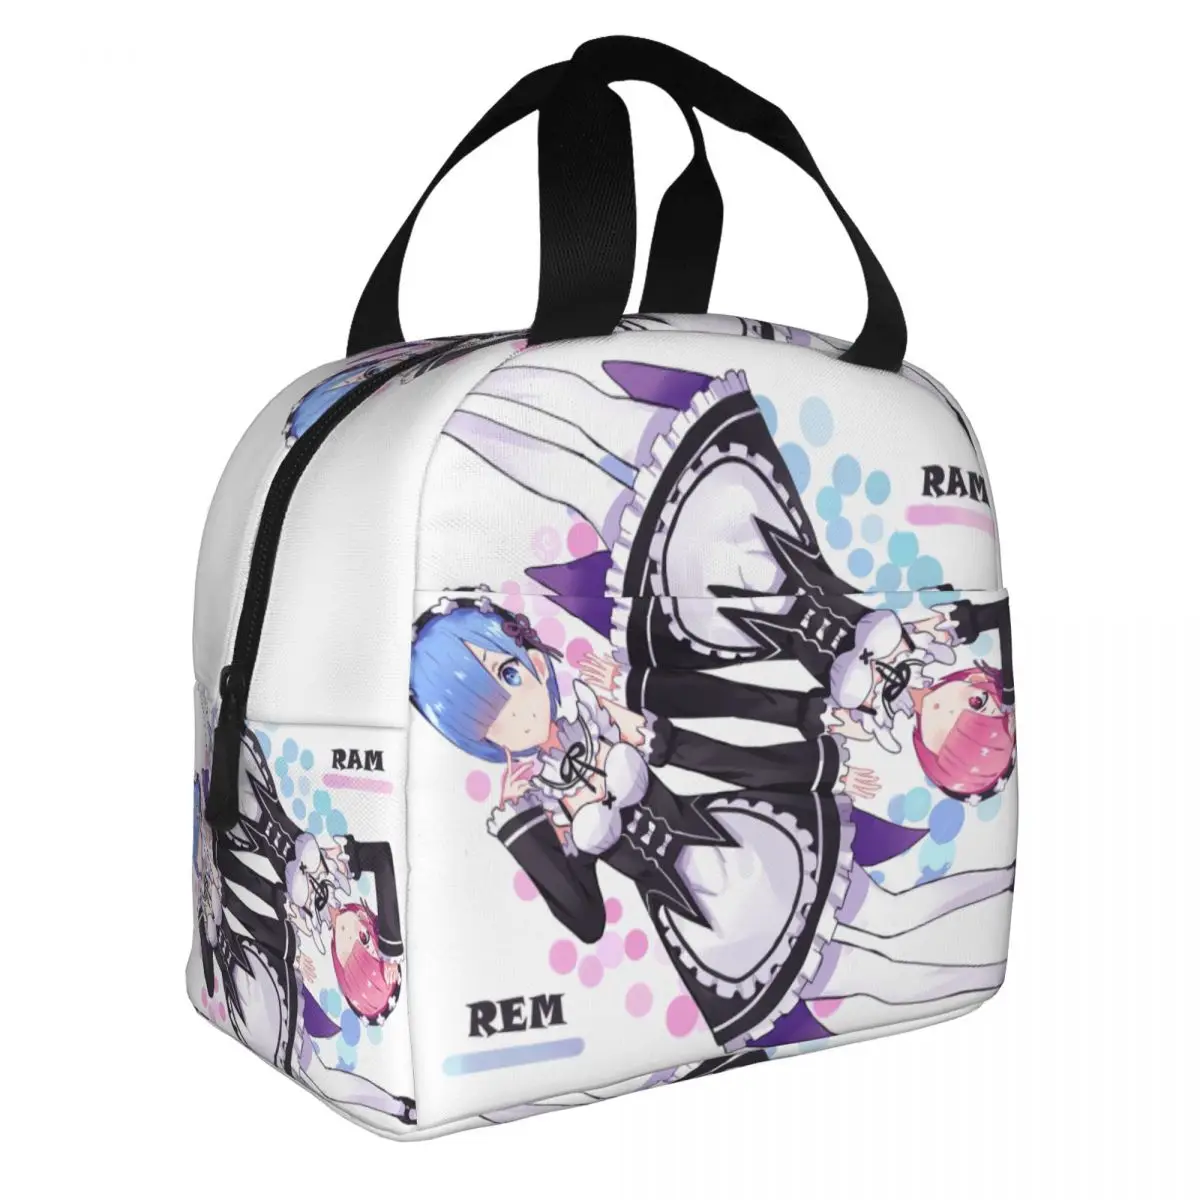 Ram And Rem Re Zero Subaru Natsuki  Lunch Bento Bags Portable Aluminum Foil thickened Thermal Cloth Lunch Bag for Women Men Boy